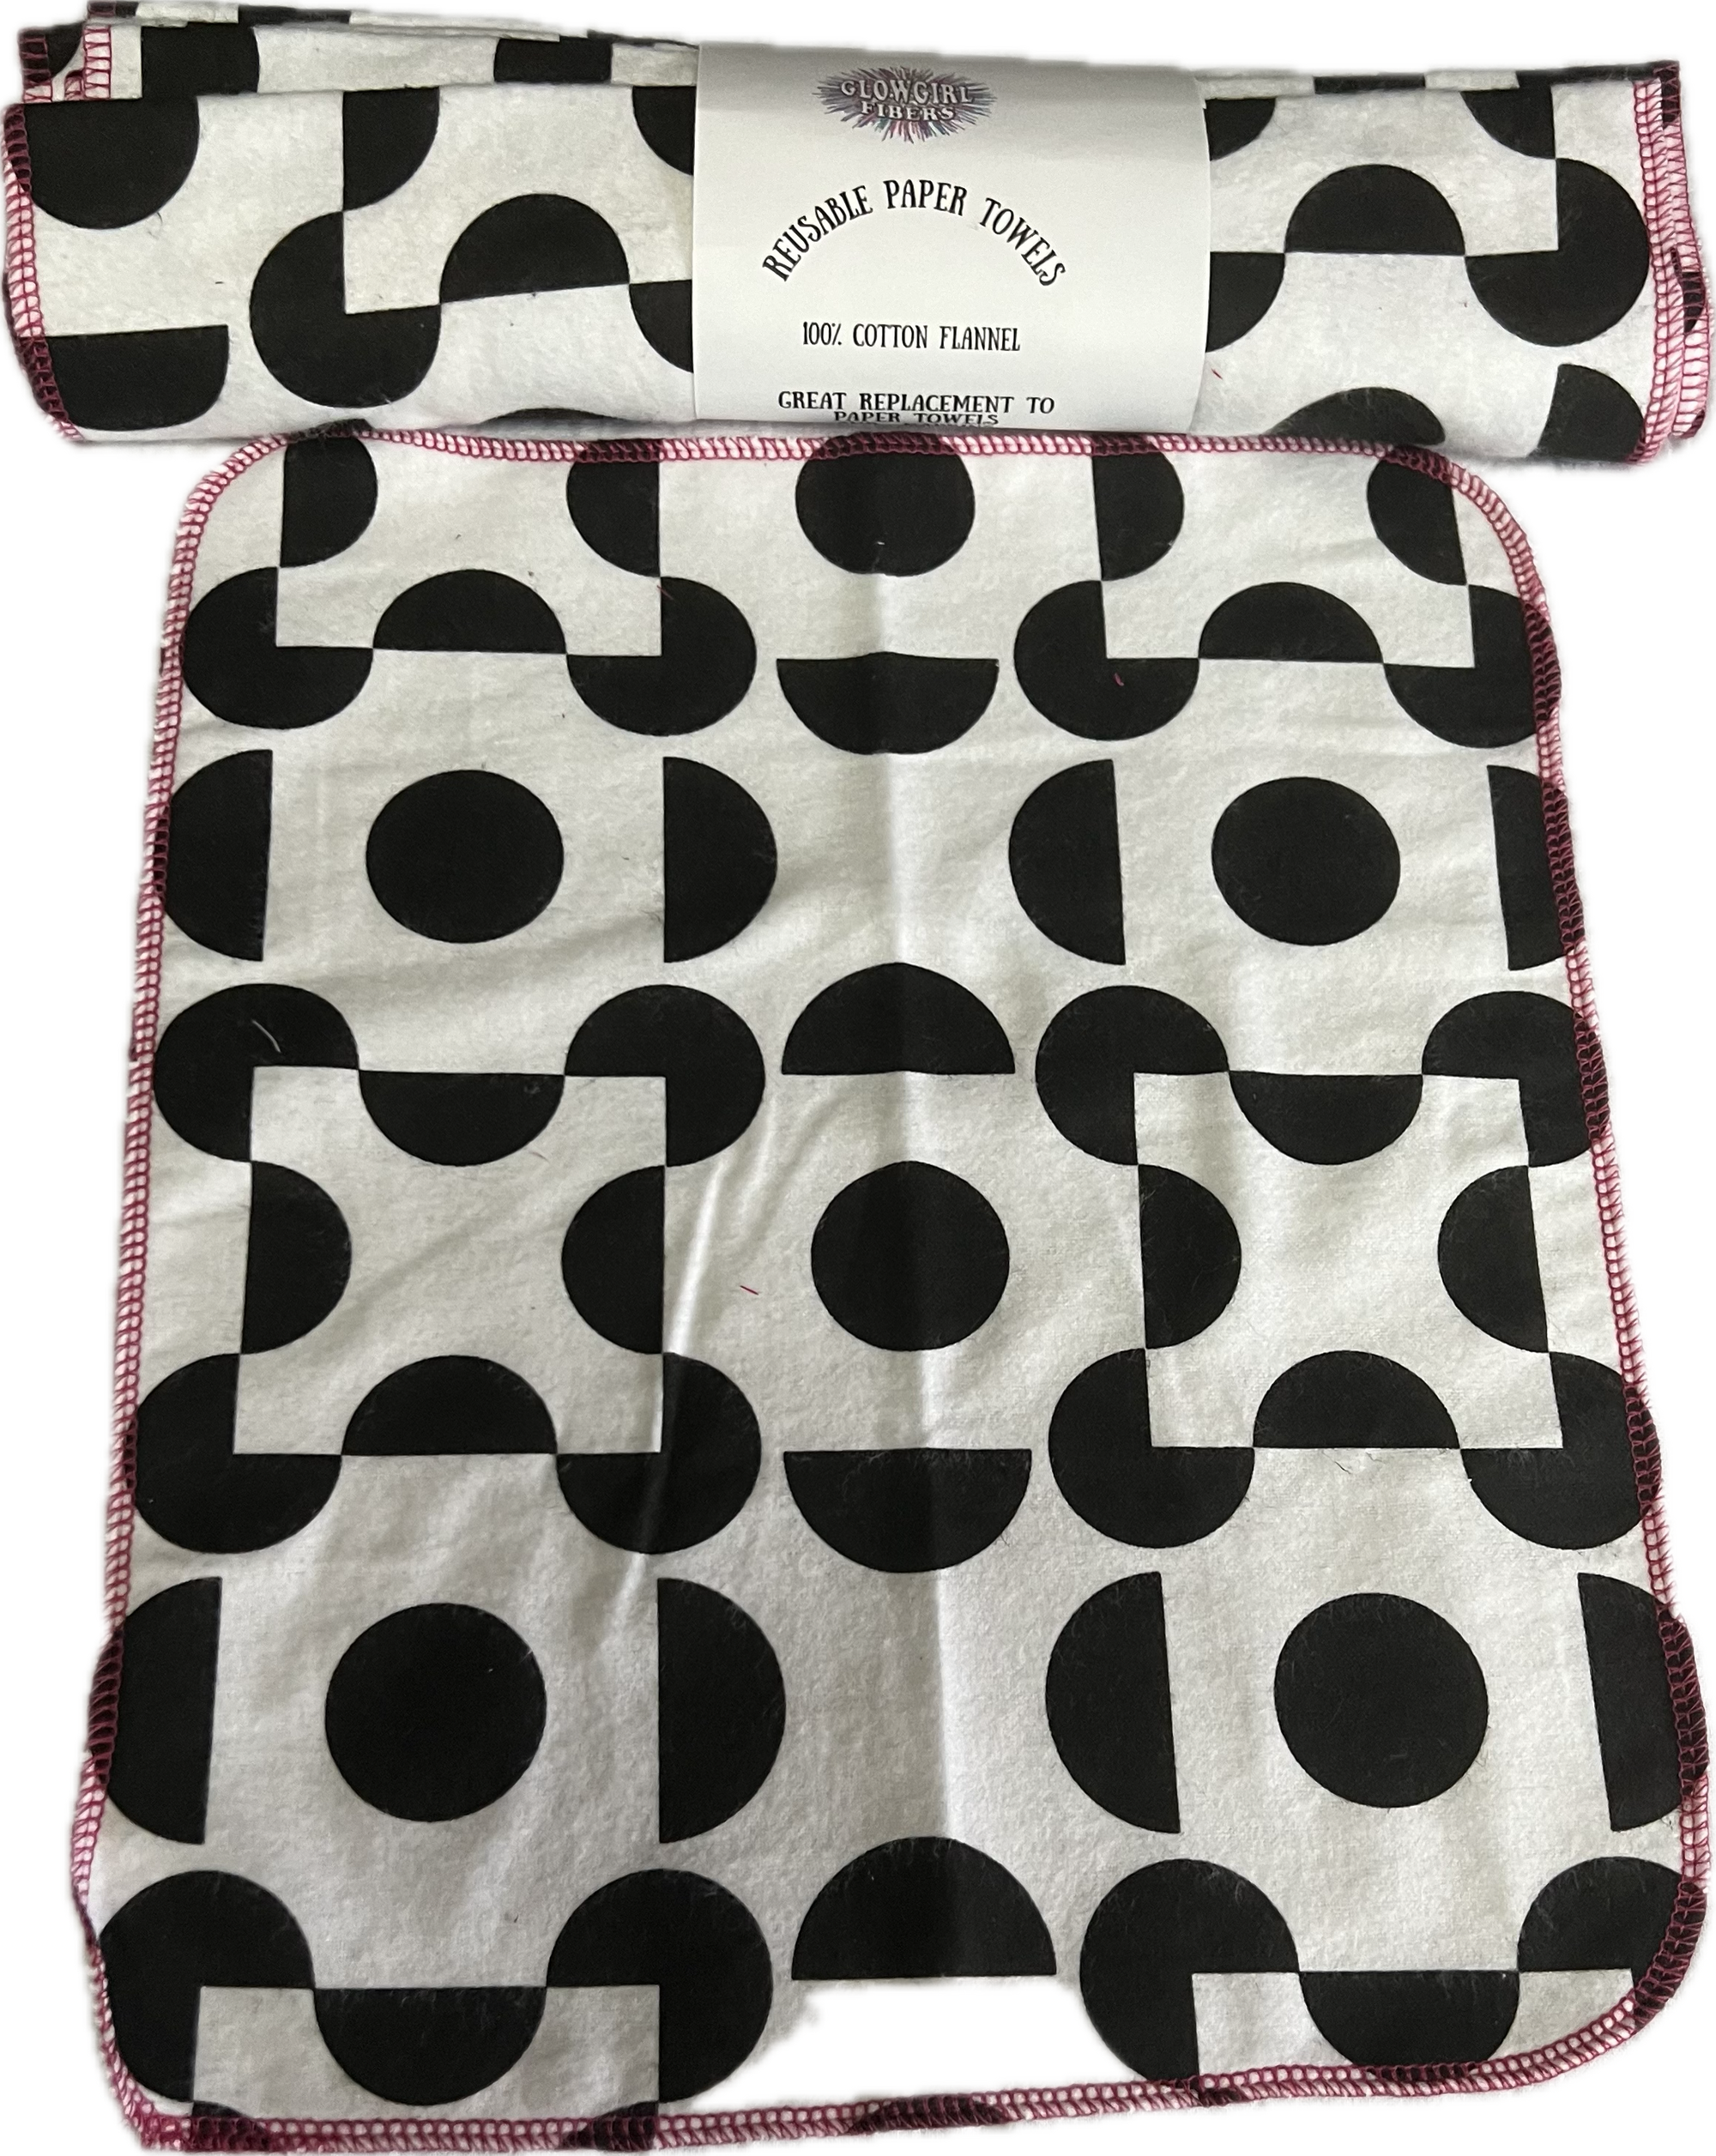 Non Paper Towels Large 10x12 Full size Sheets Set of 6  - Mod geometric Black and White